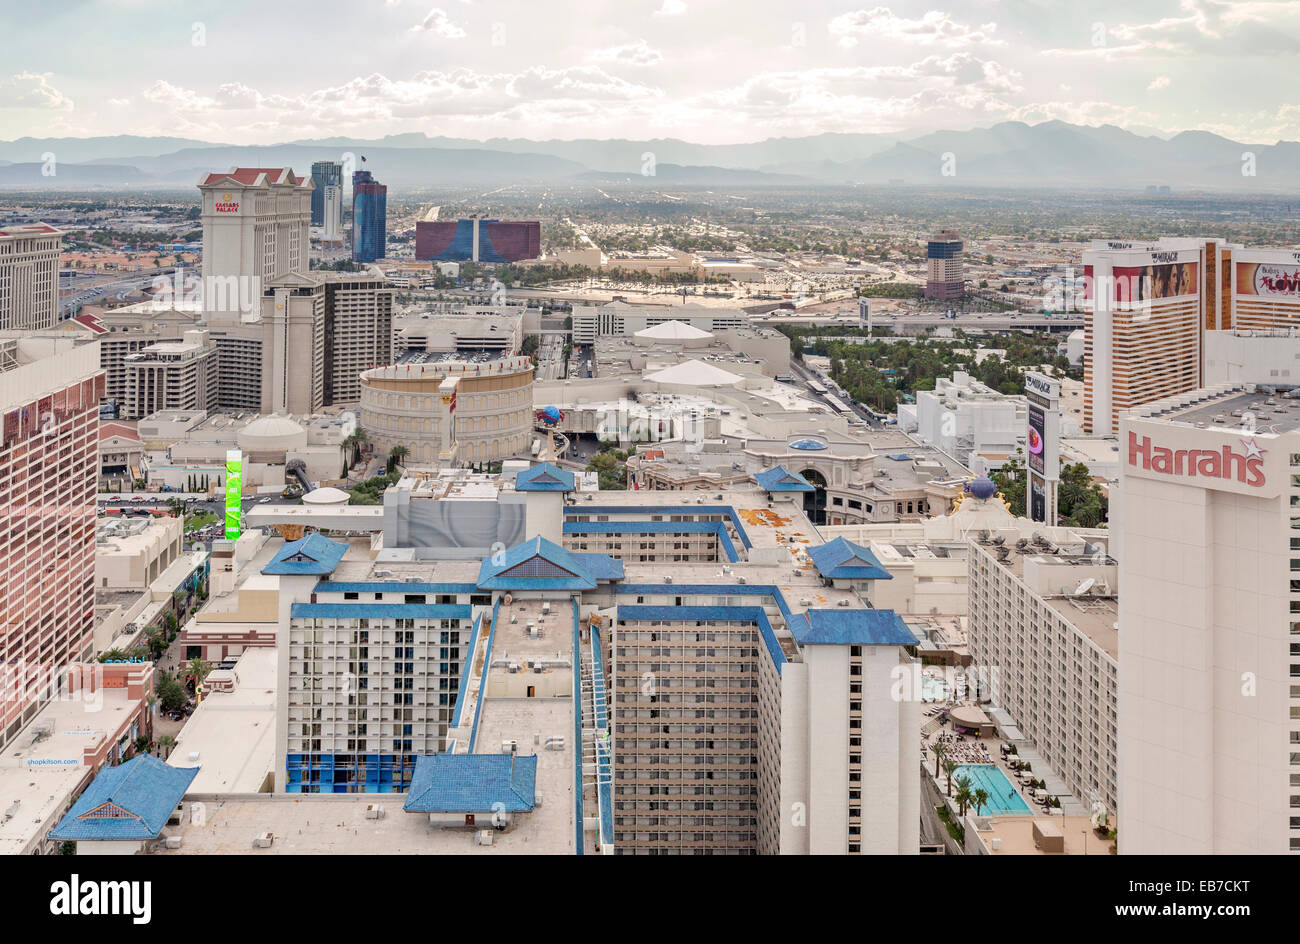 Aerial view of Resorts, Hotels and Casinos in Las Vegas, Nevada. Stock Photo